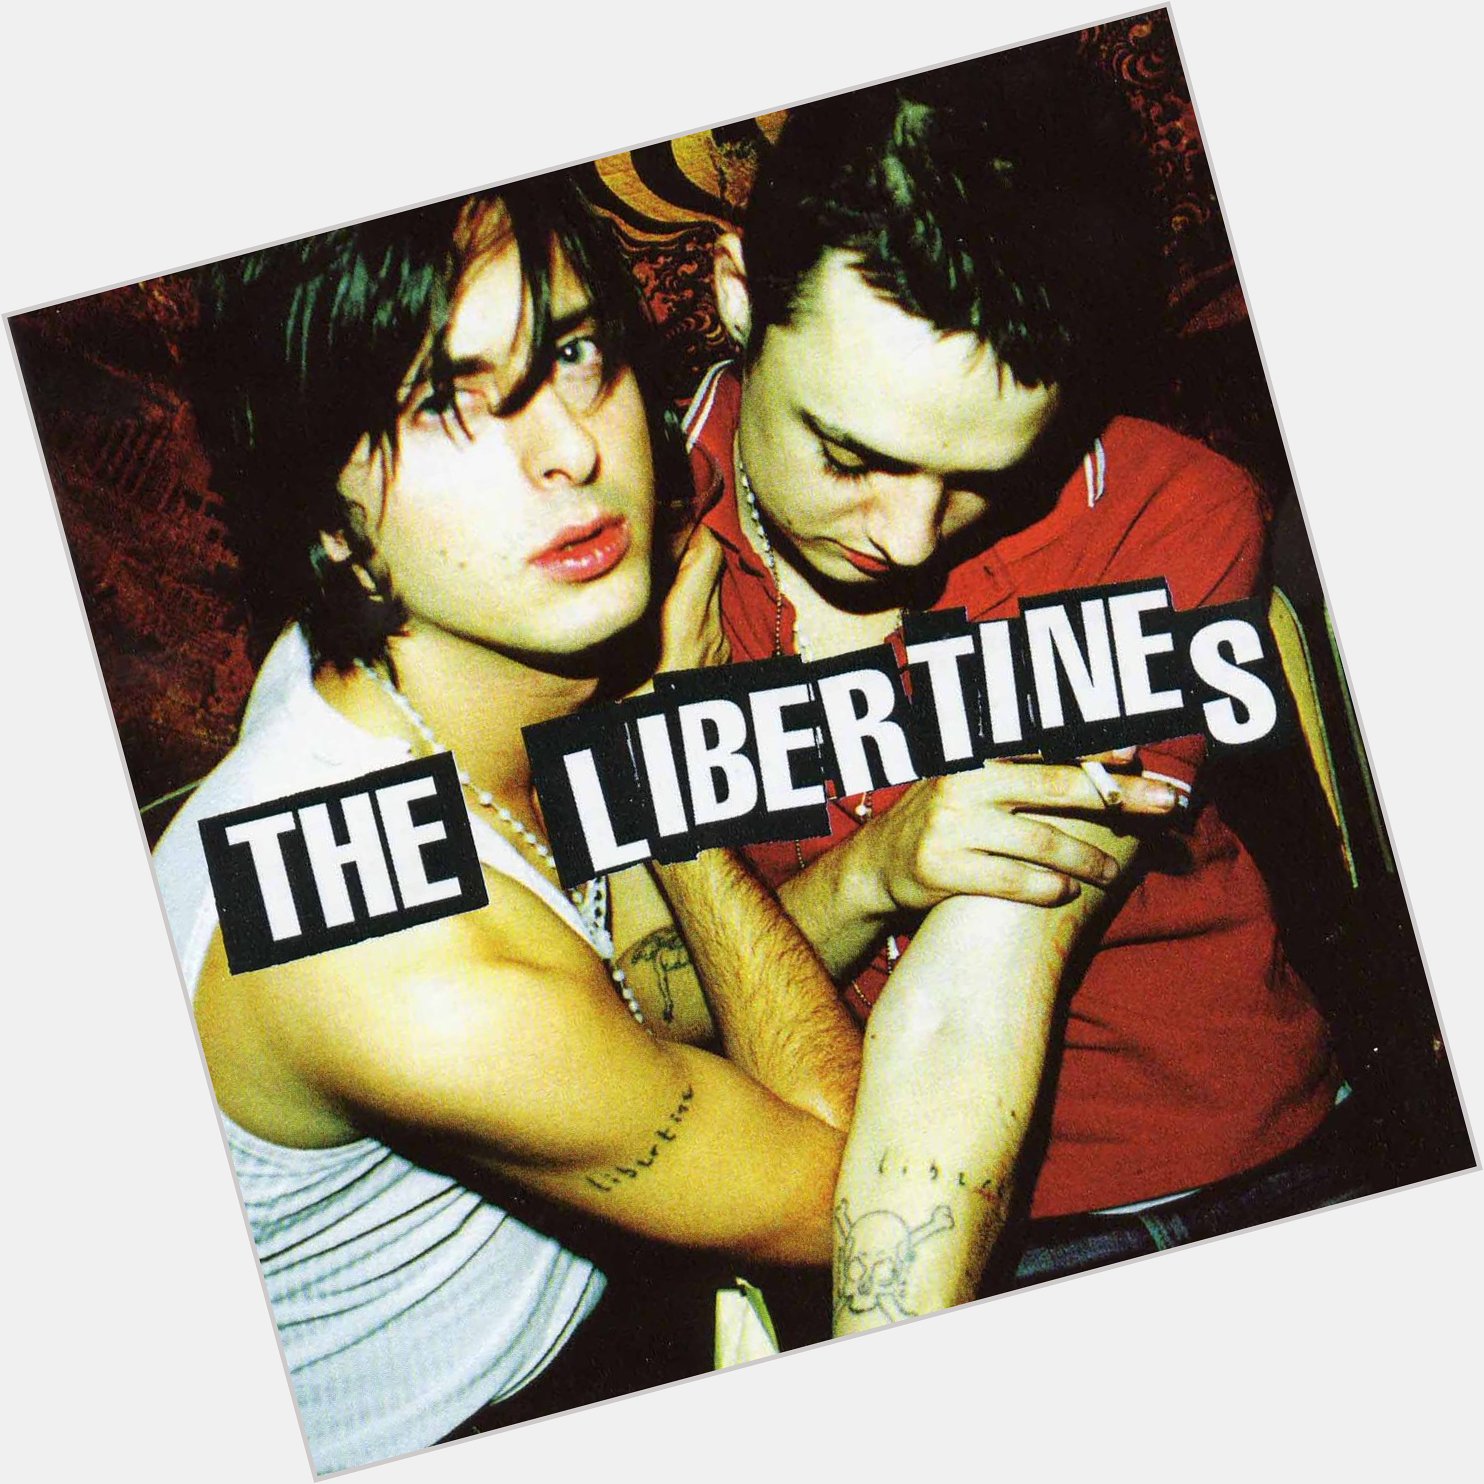 Happy birthday Pete Doherty.

What\s your favourite Libertines track? 